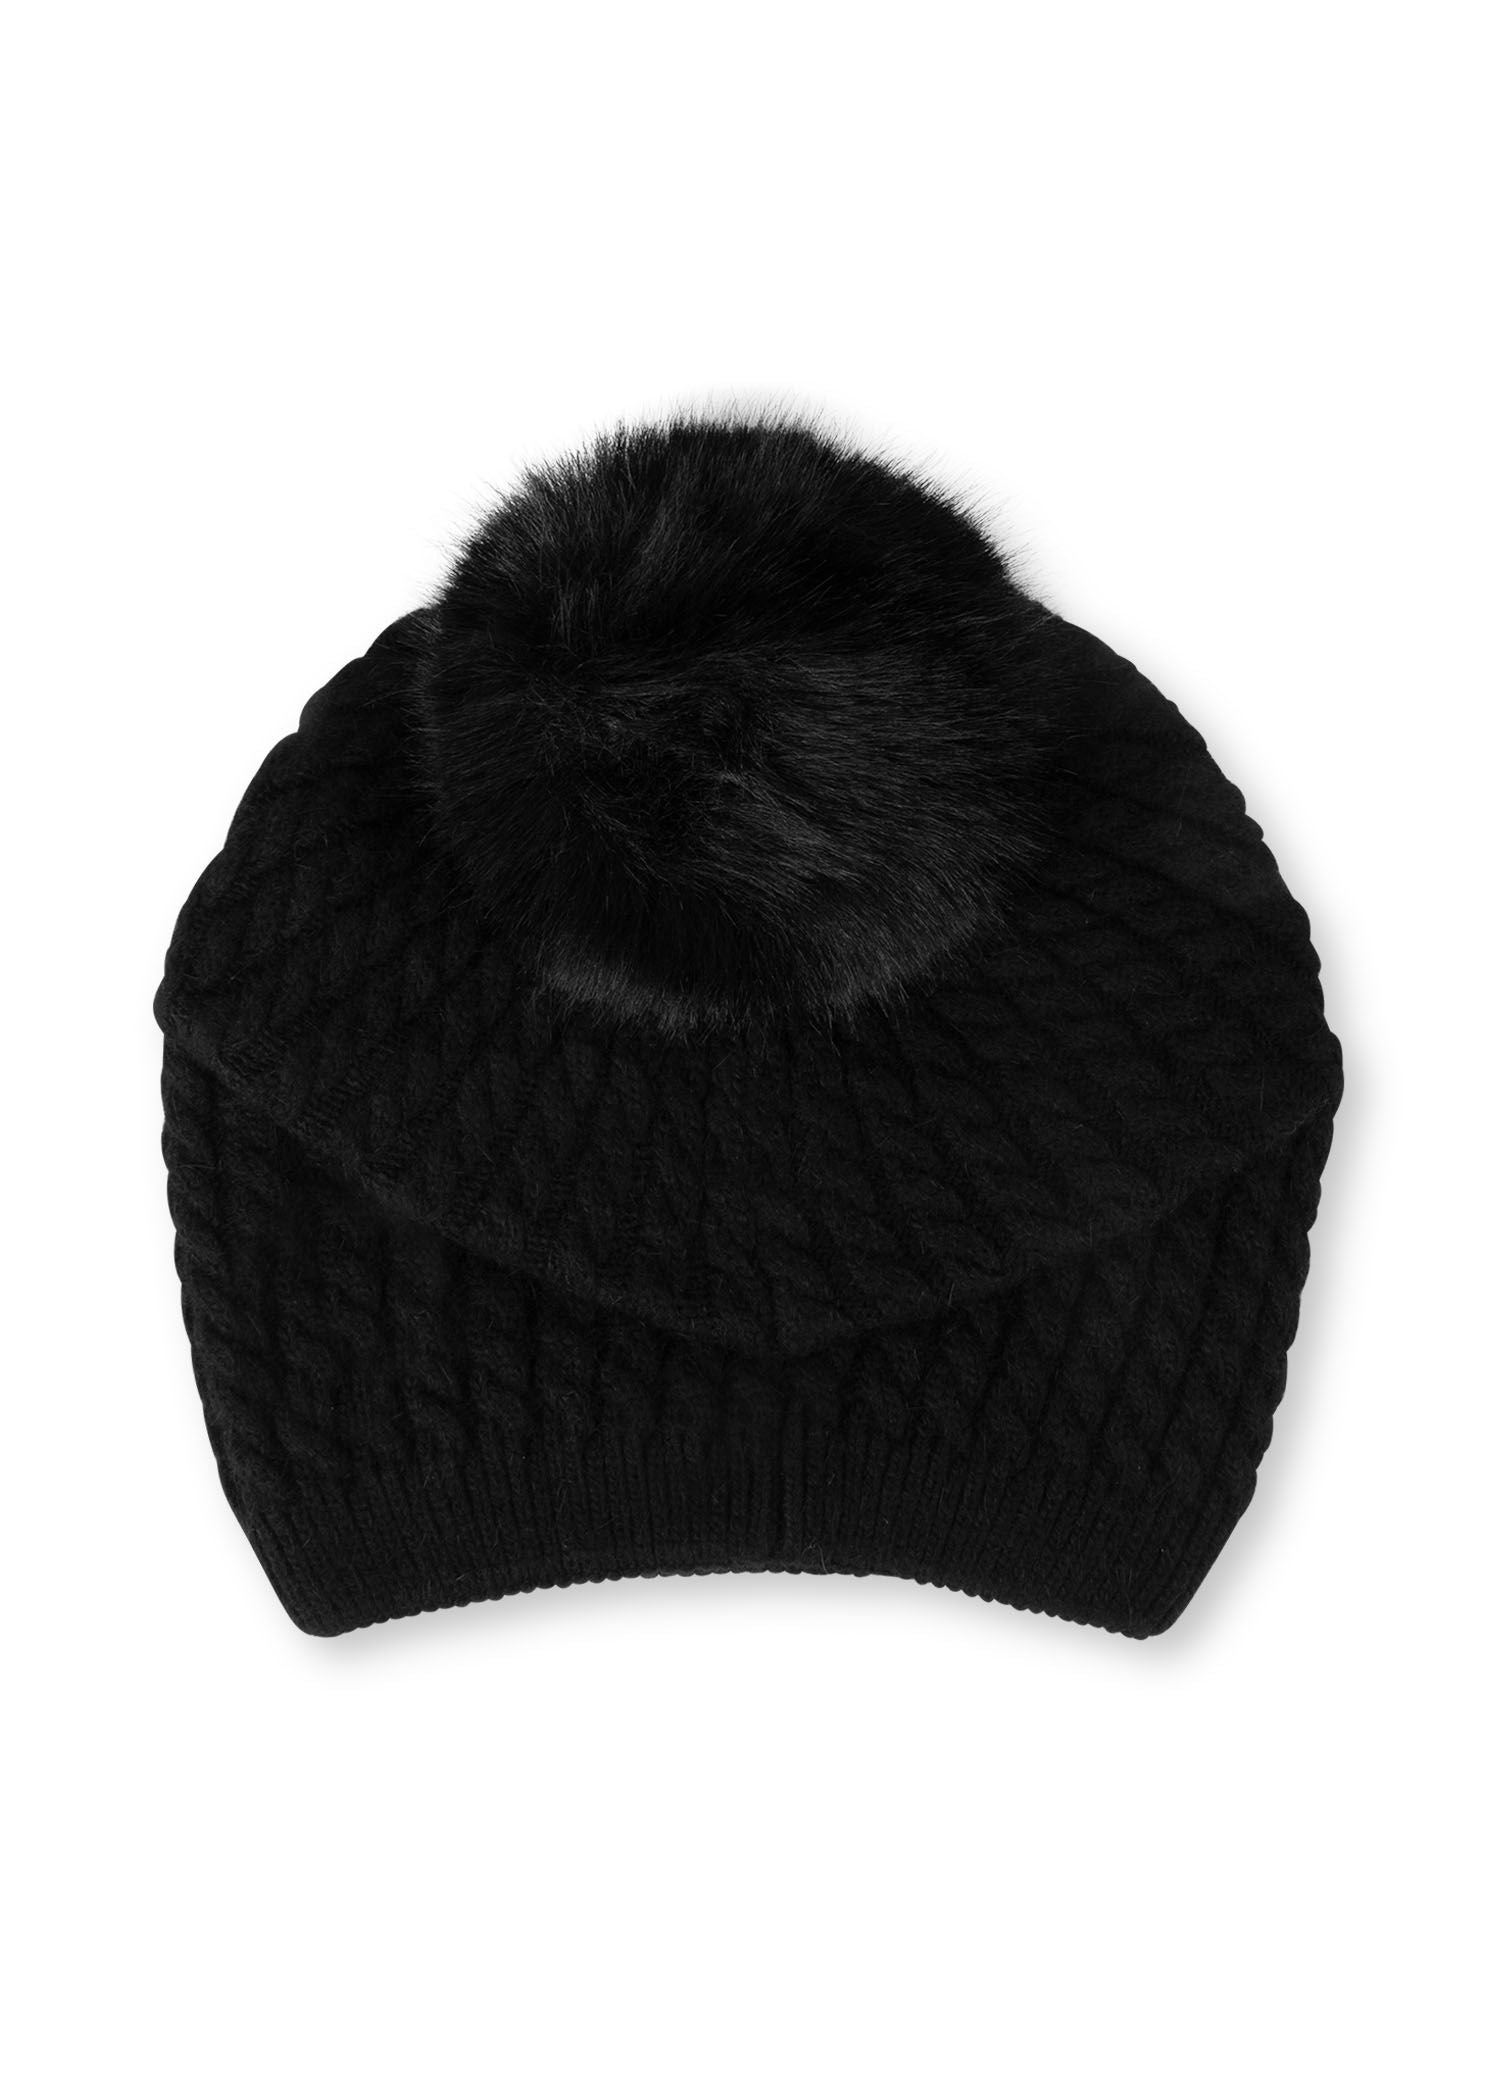 Cabin Cable Hat Black